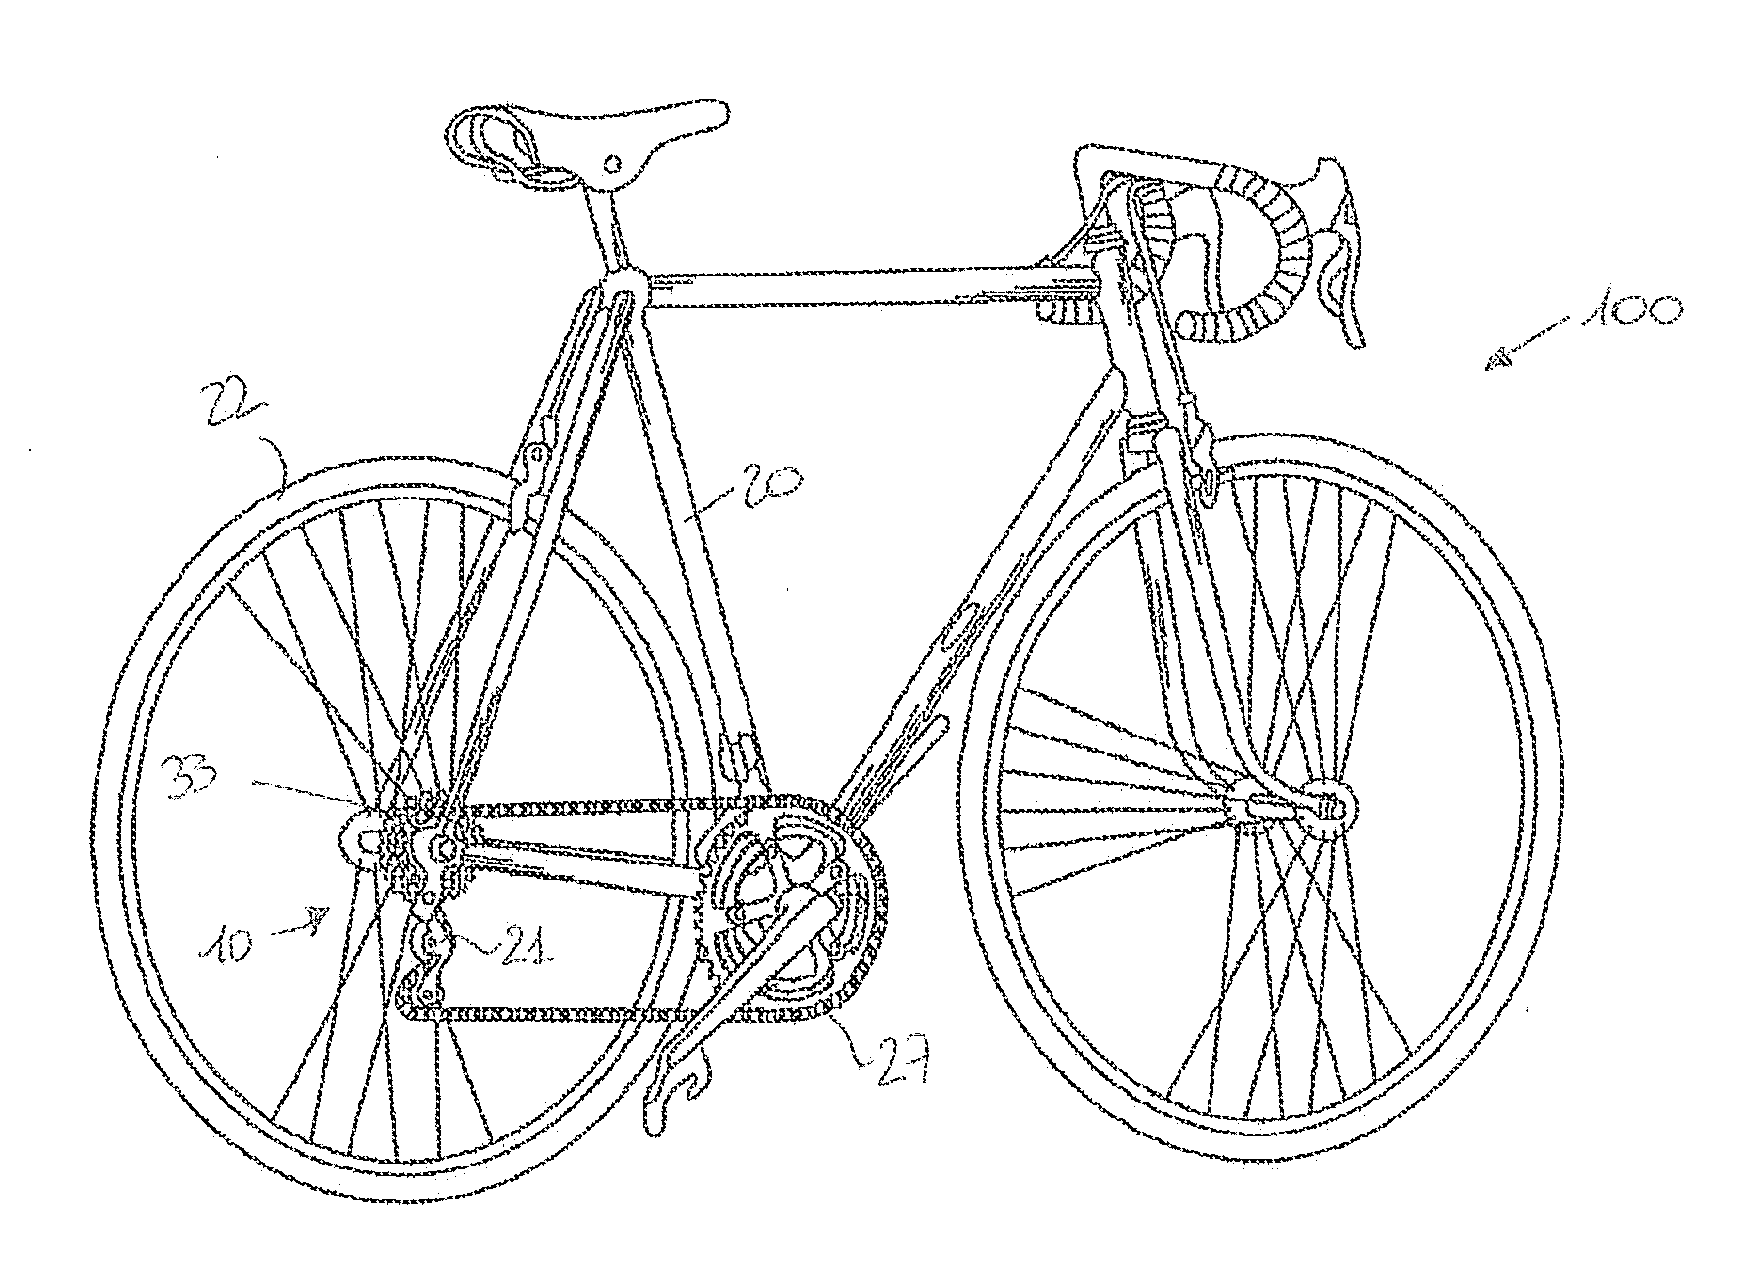 Bicycle gearshift with improved precision control